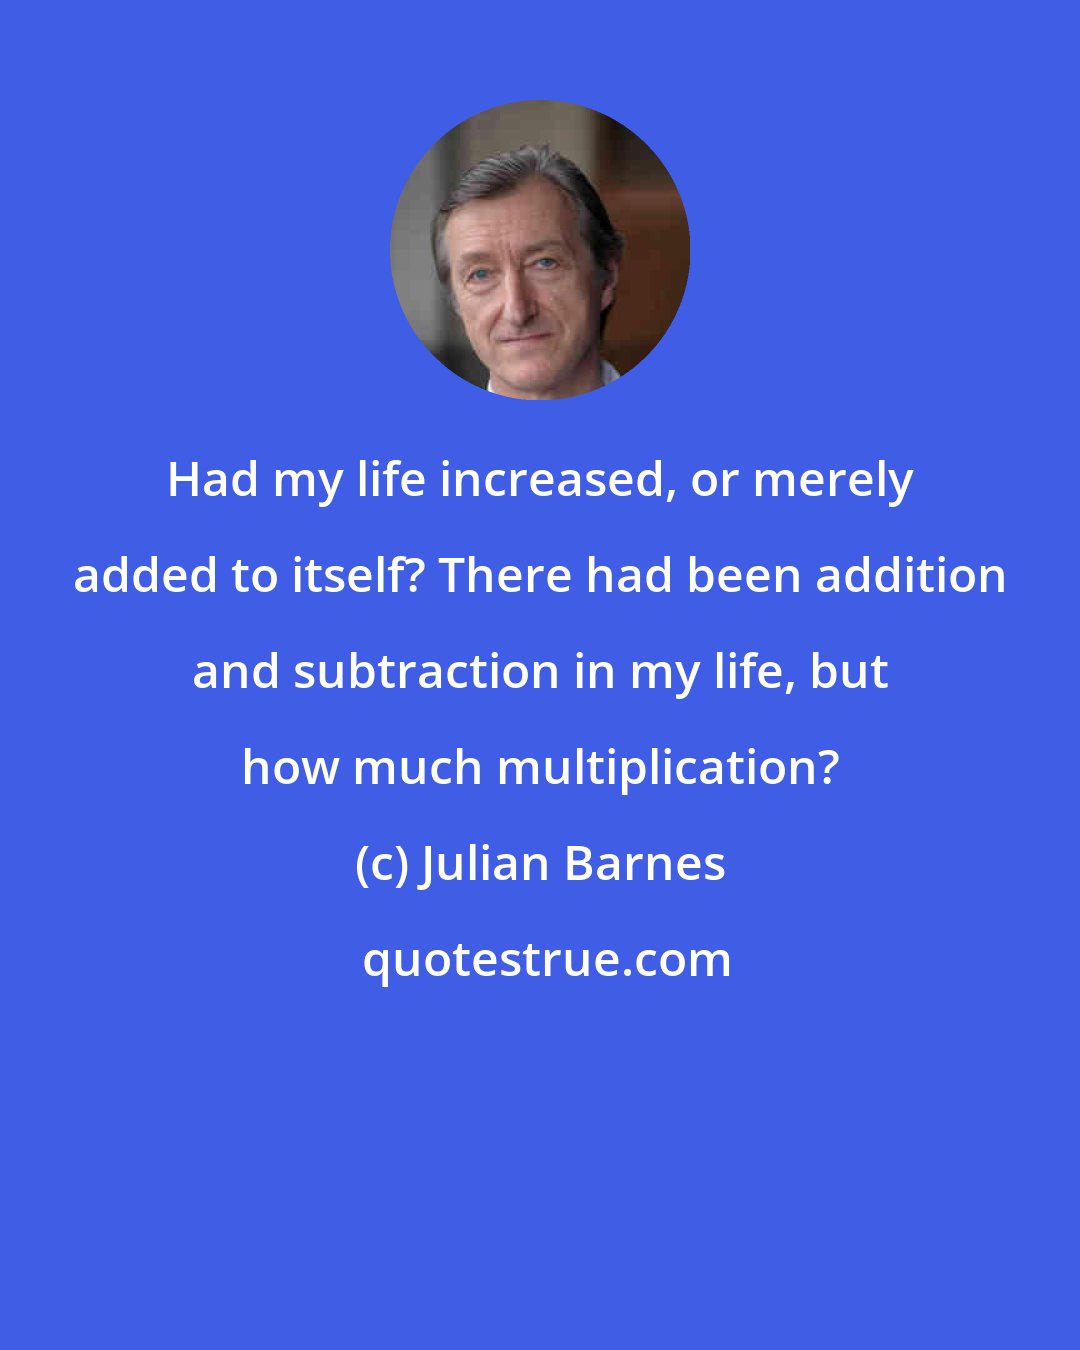 Julian Barnes: Had my life increased, or merely added to itself? There had been addition and subtraction in my life, but how much multiplication?